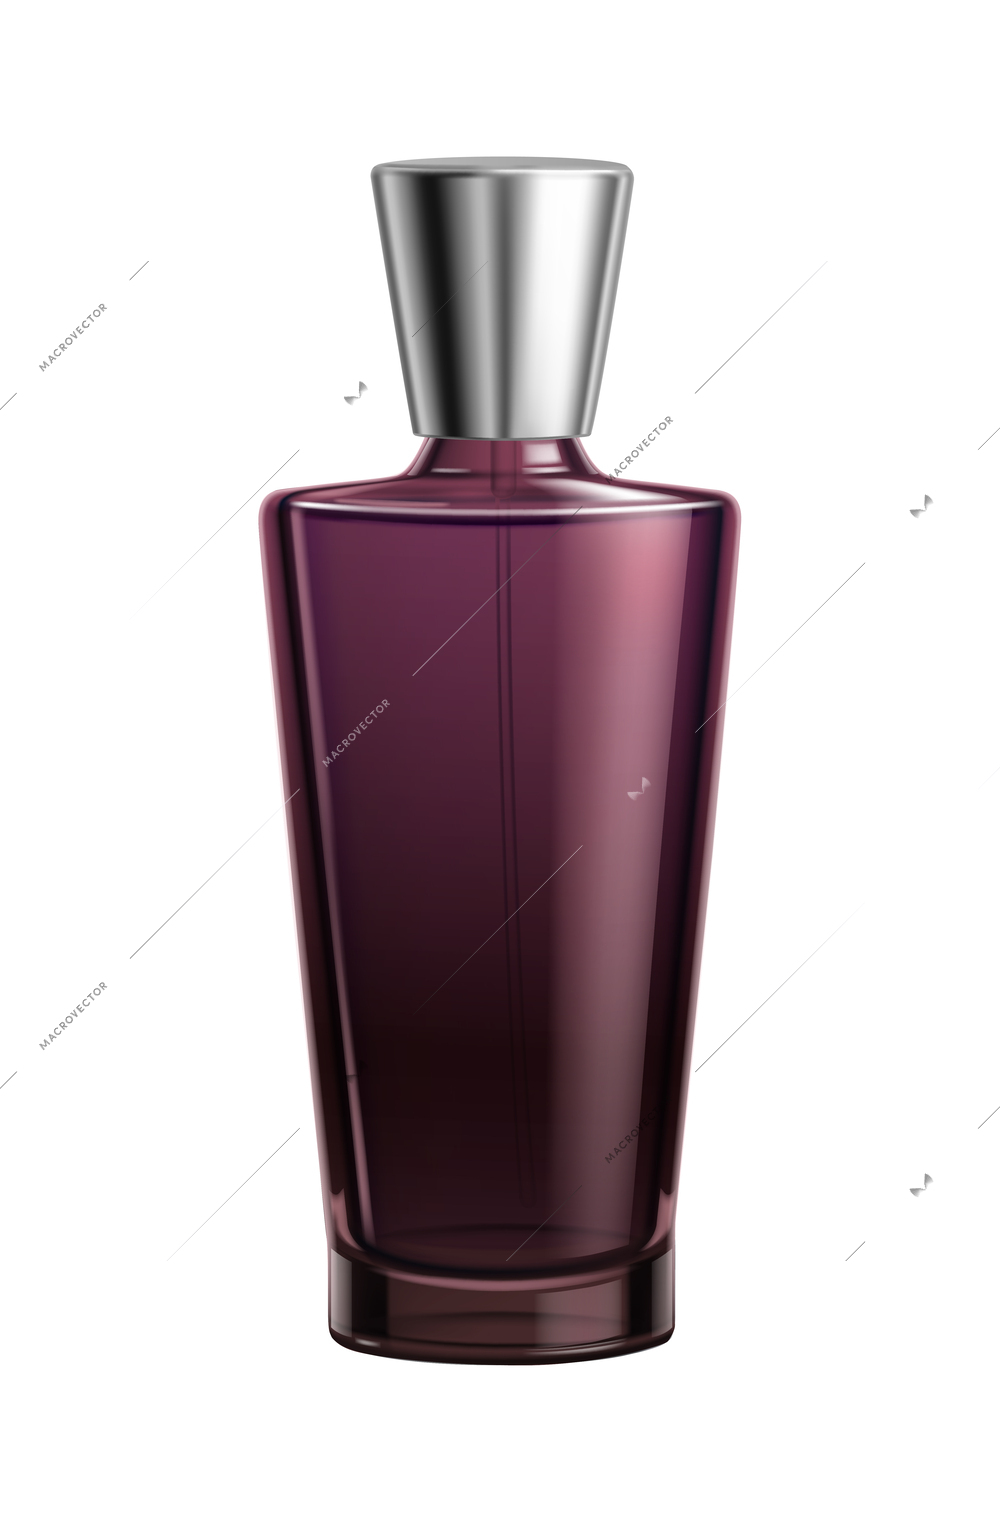 Realistic colored glass perfume bottle with silver cap vector illustration